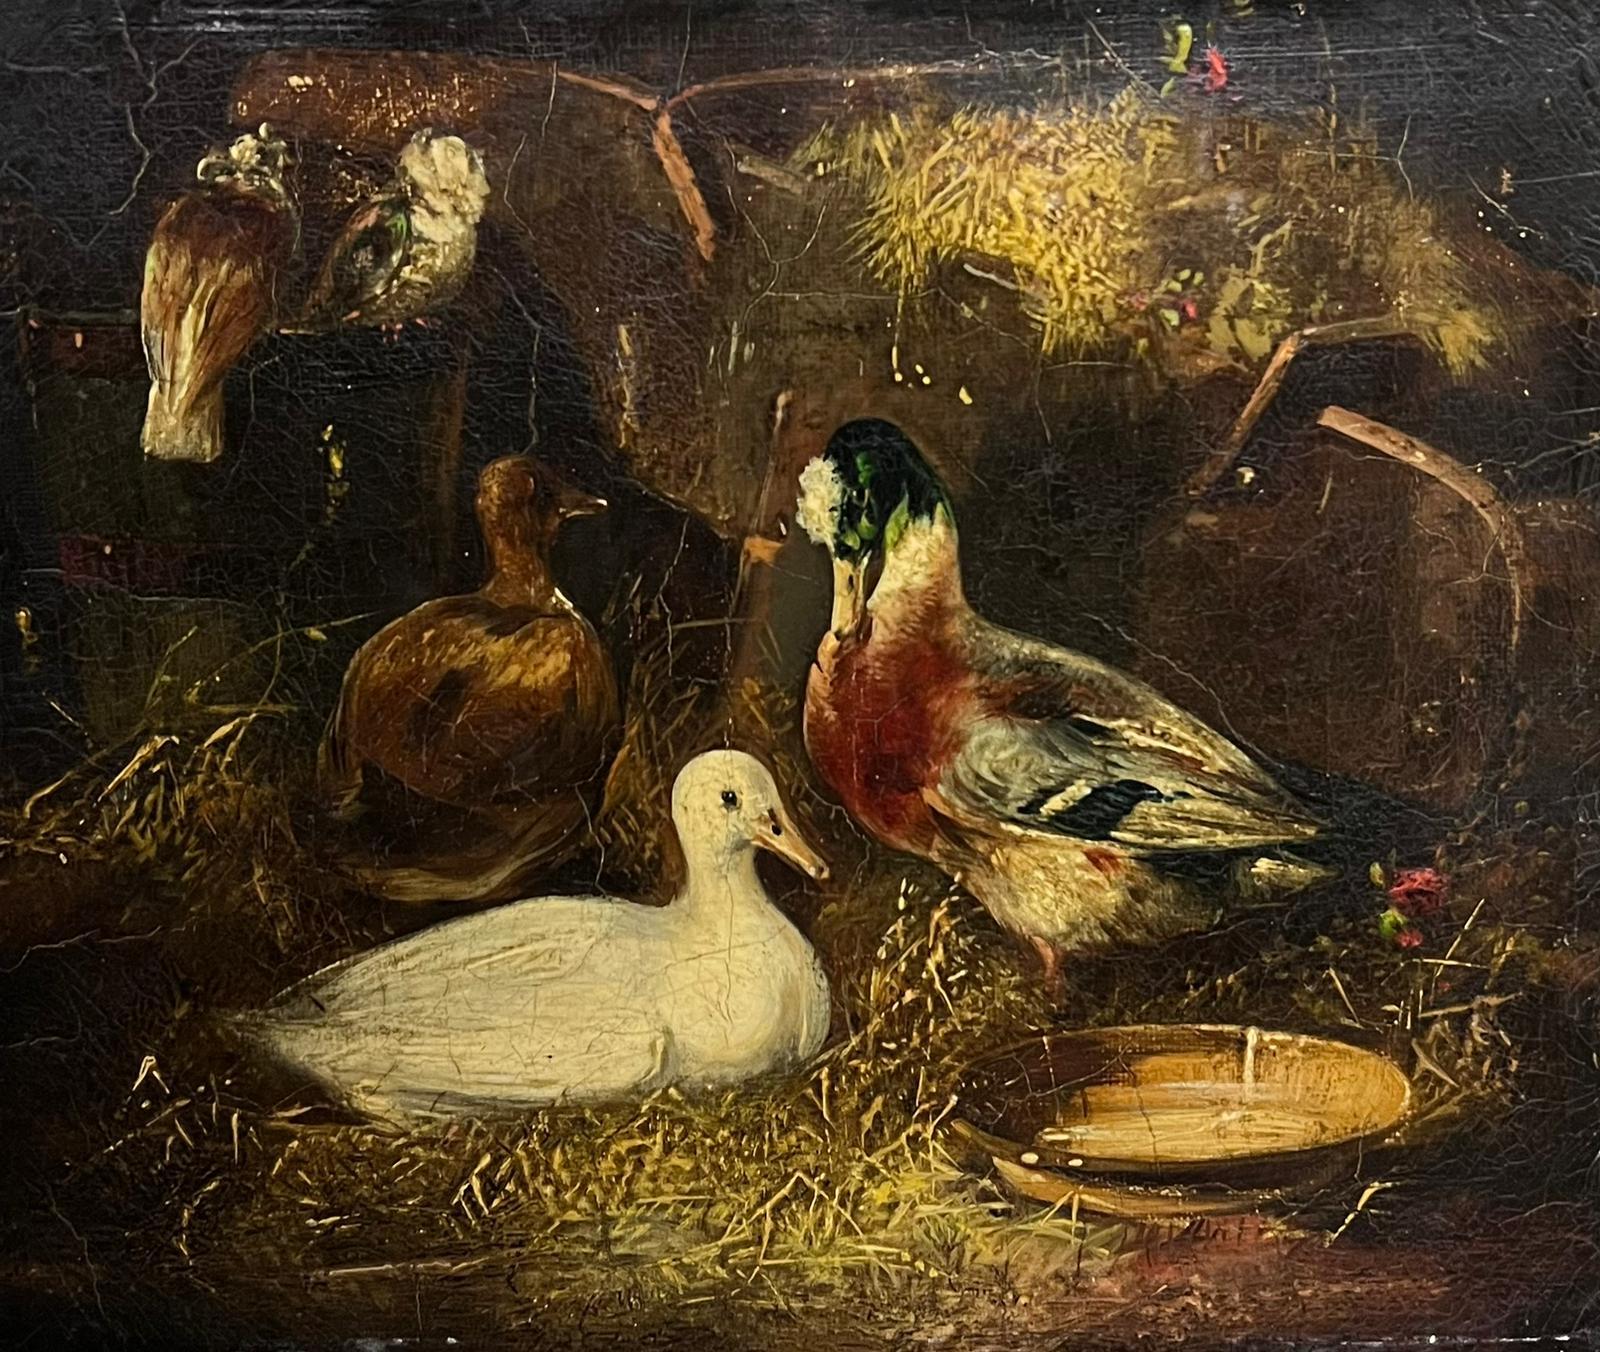 circle of John Frederick Herring Snr (1795-1865) Animal Painting - Victorian Oil Painting Ducks & Pigeon in Barn Interior Antique Oil Painting